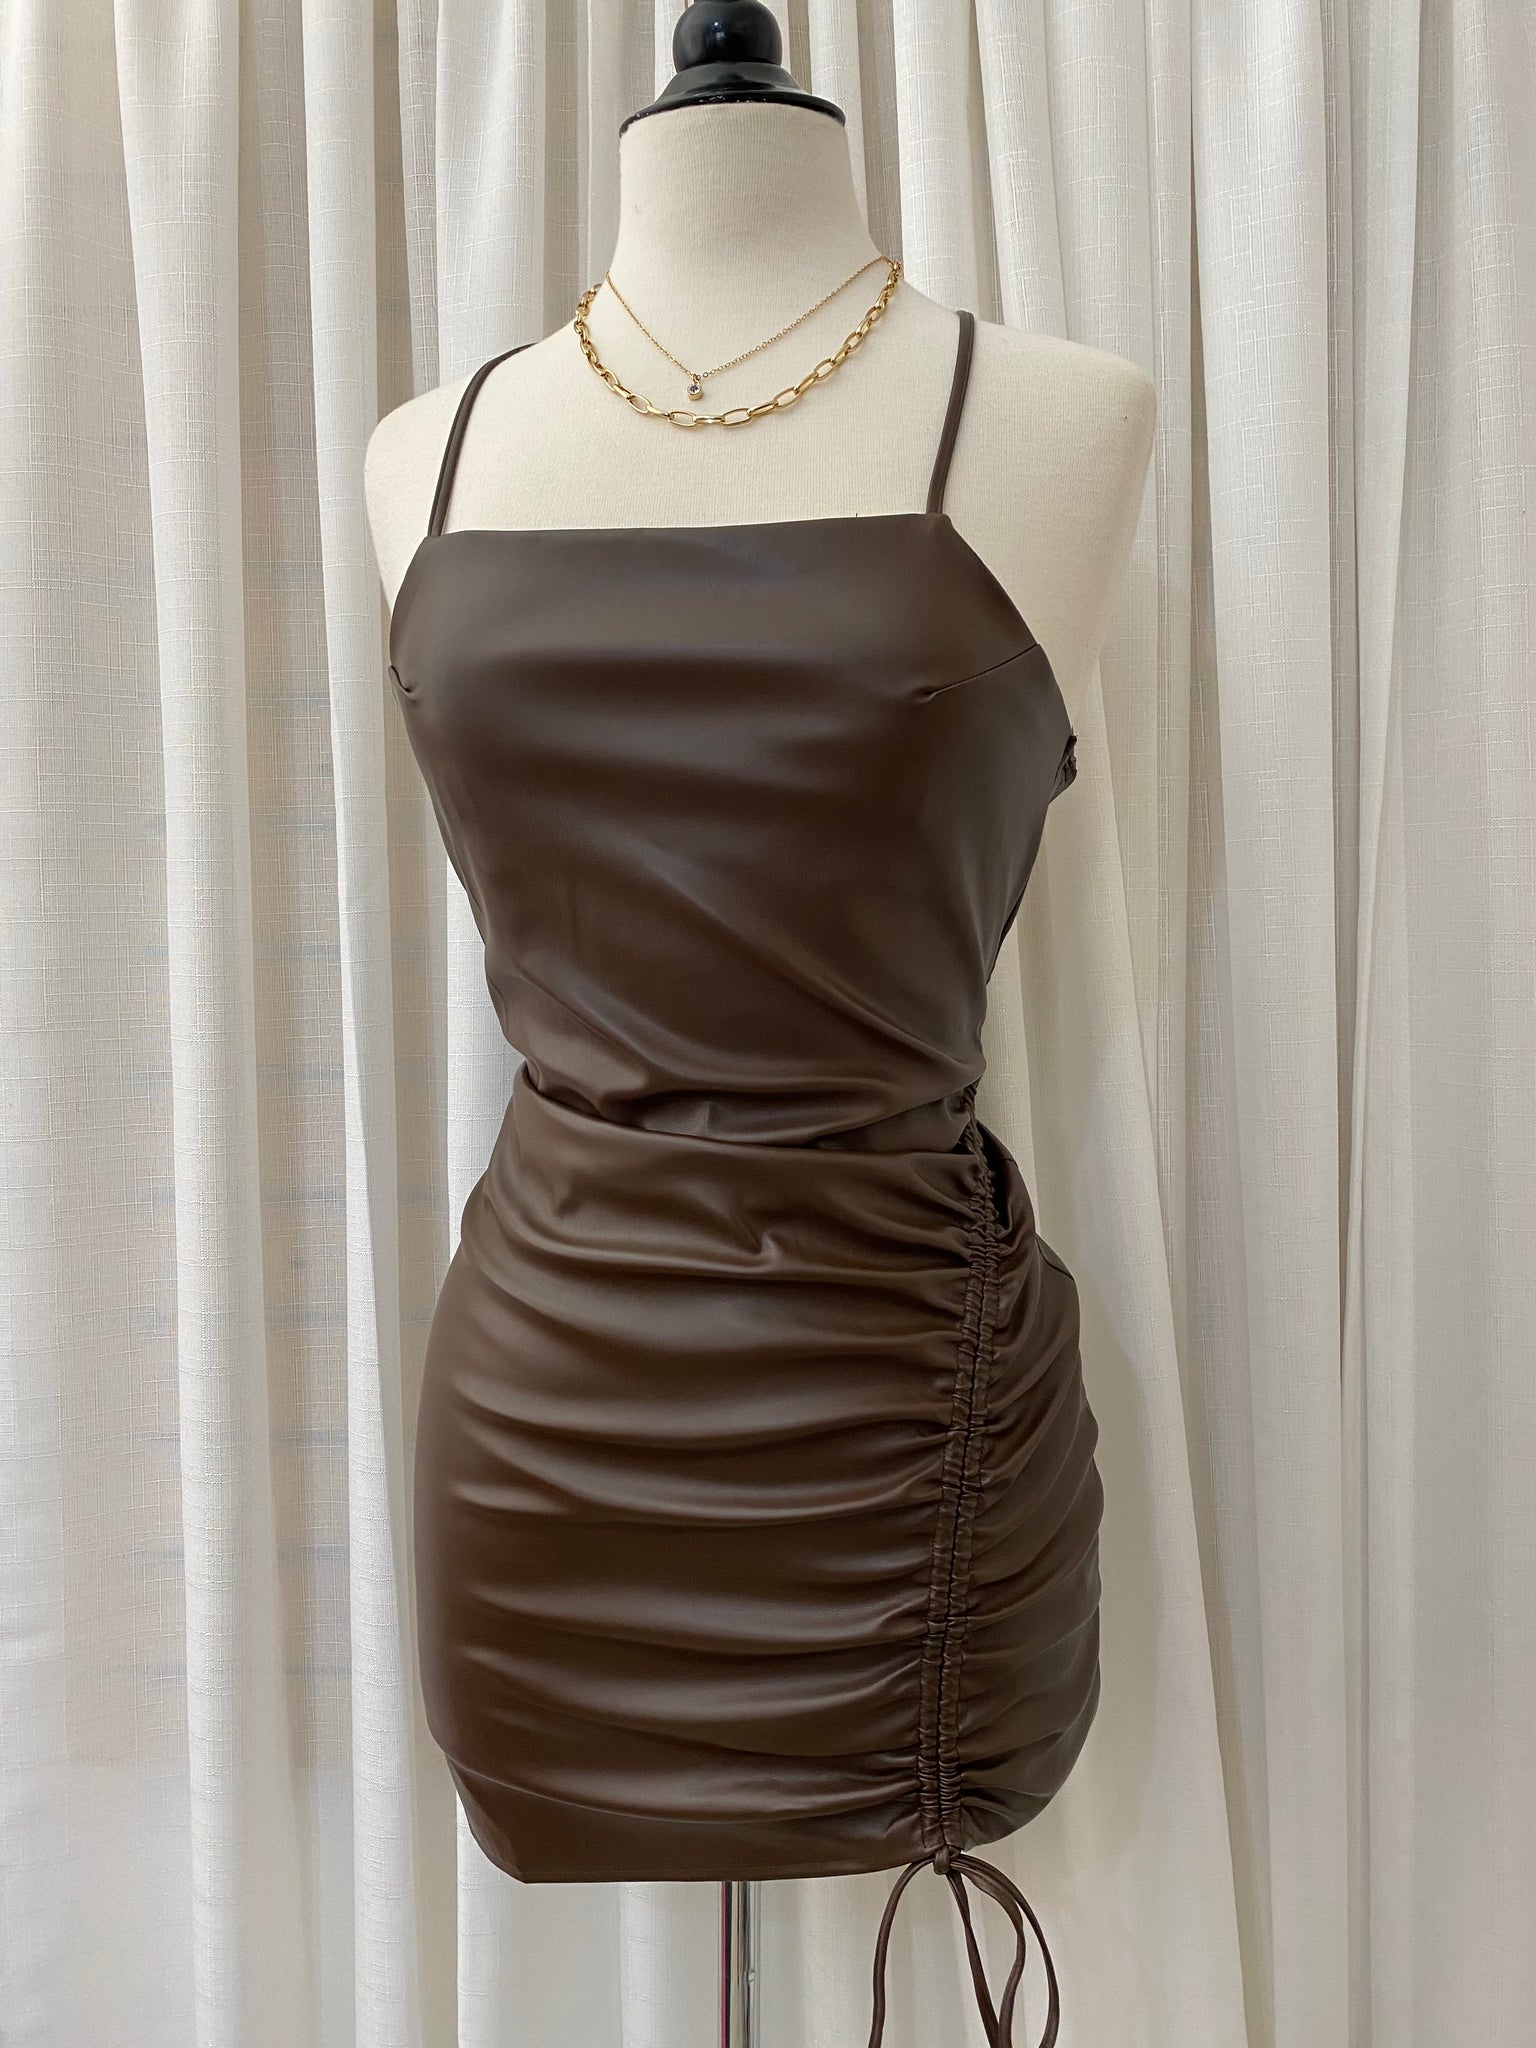 The “Fall Baddie” Faux Leather Dress